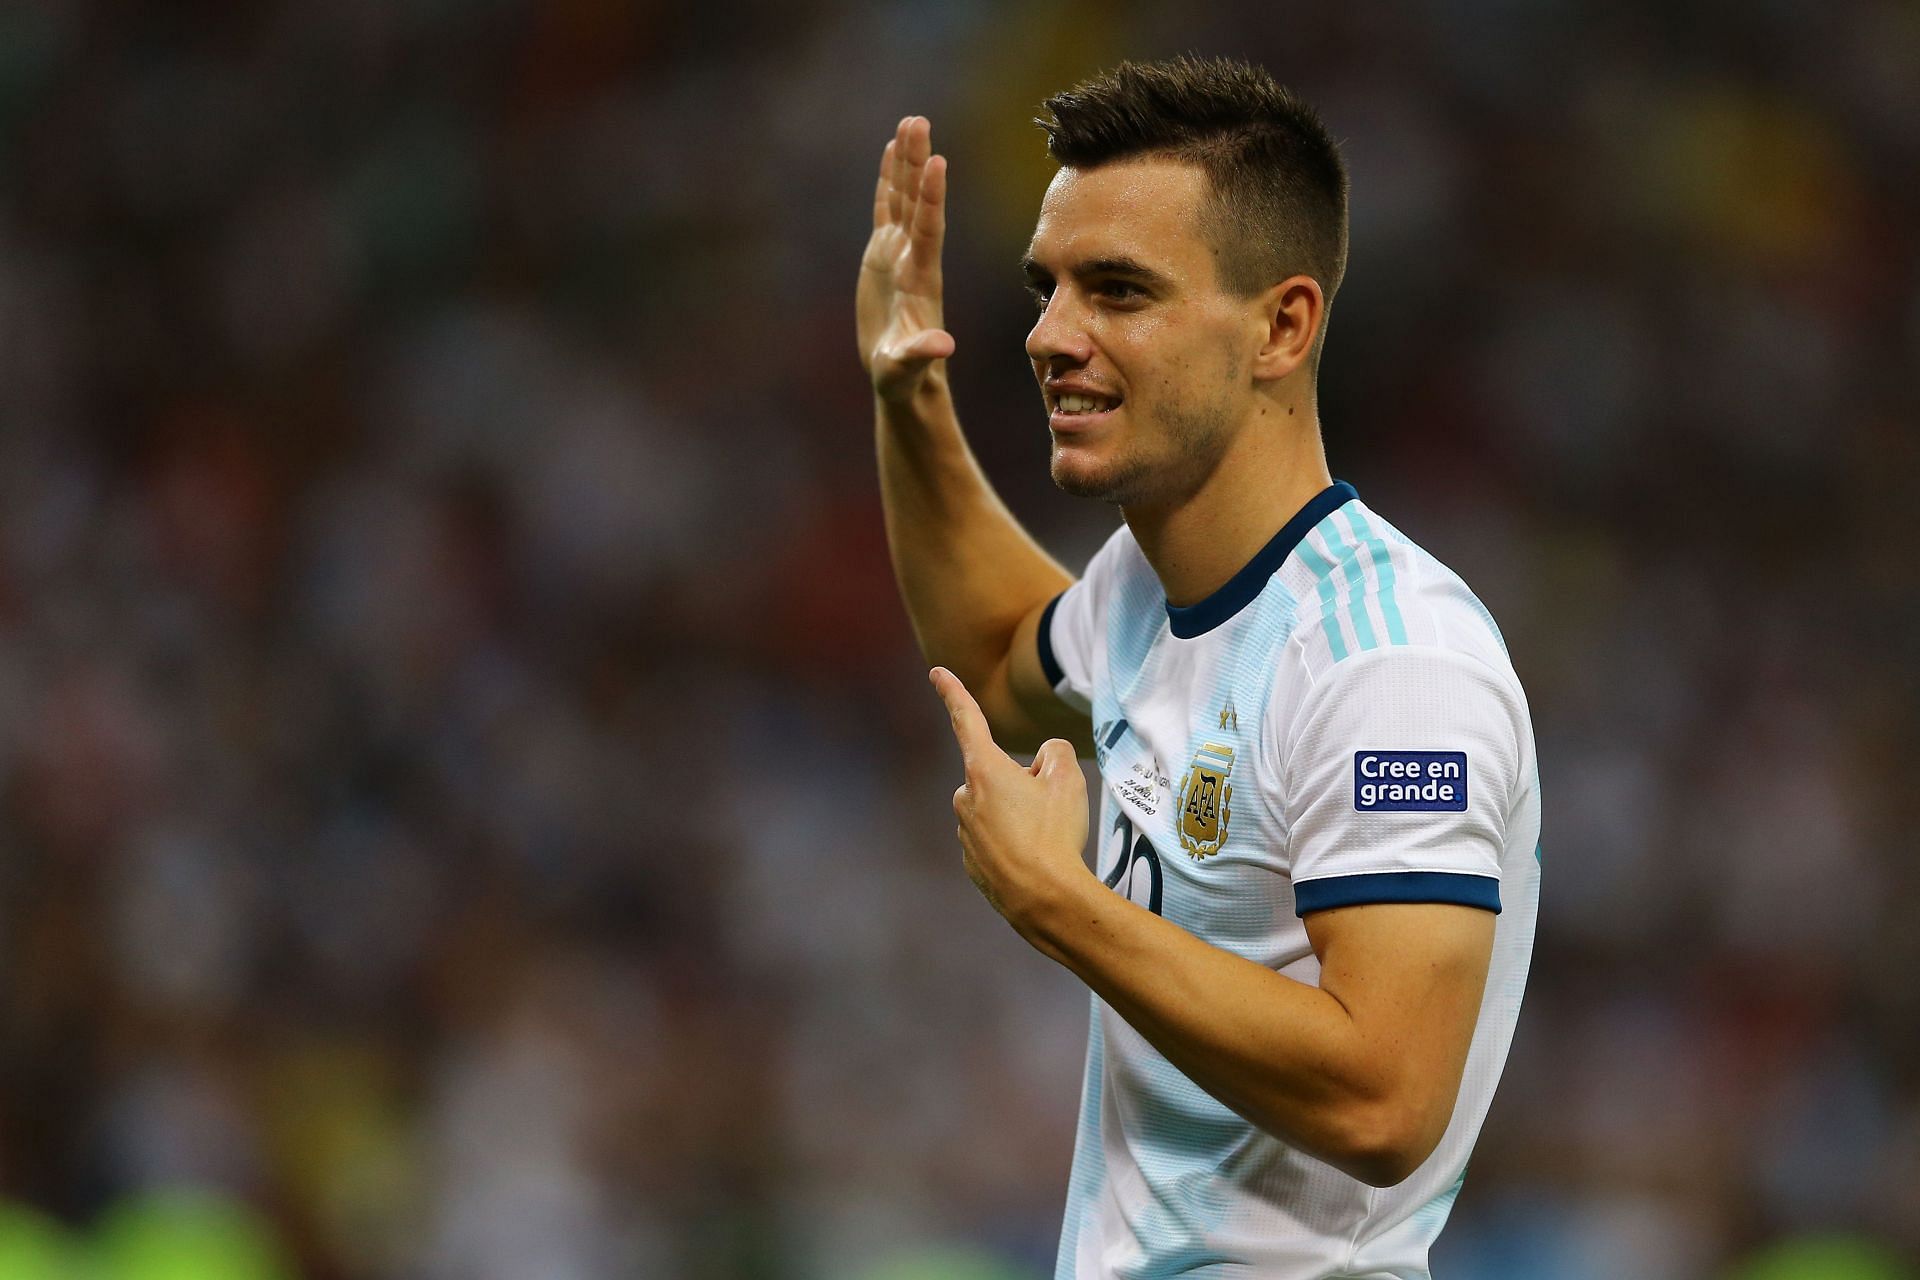 Lo Celso has been great for Argentina but could miss the World Cup